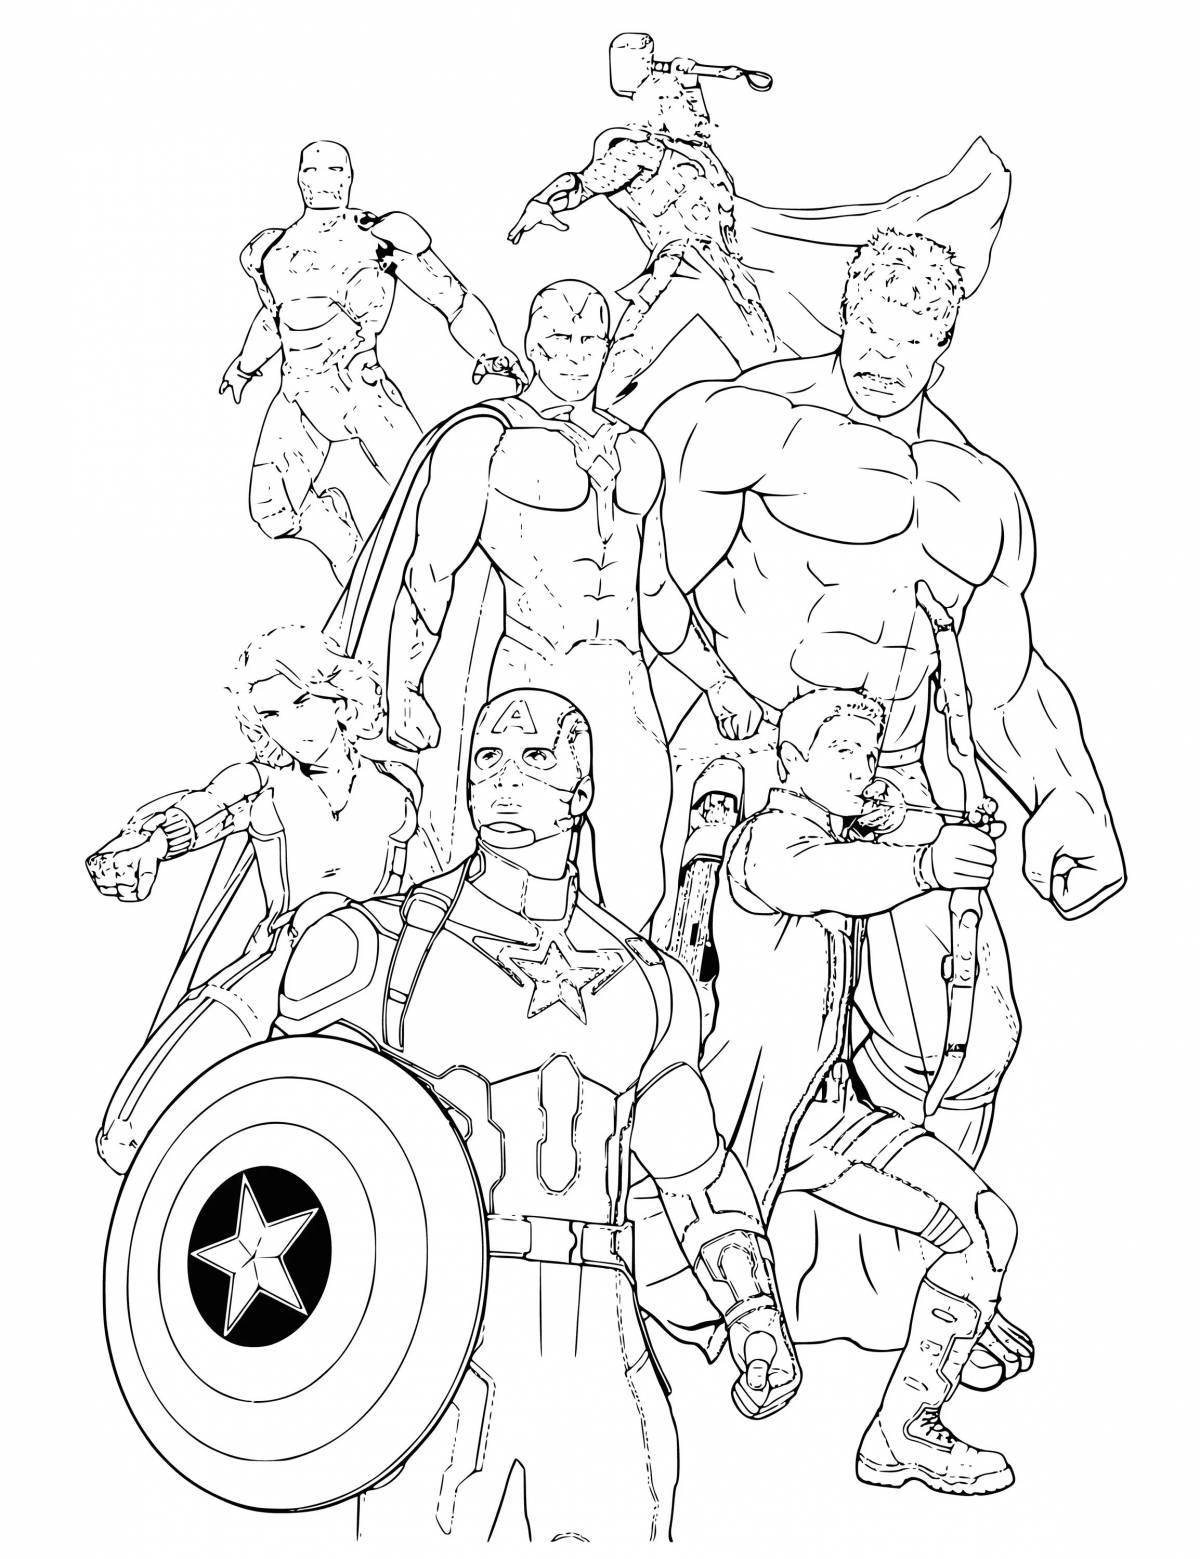 Marvelous avengers coloring page